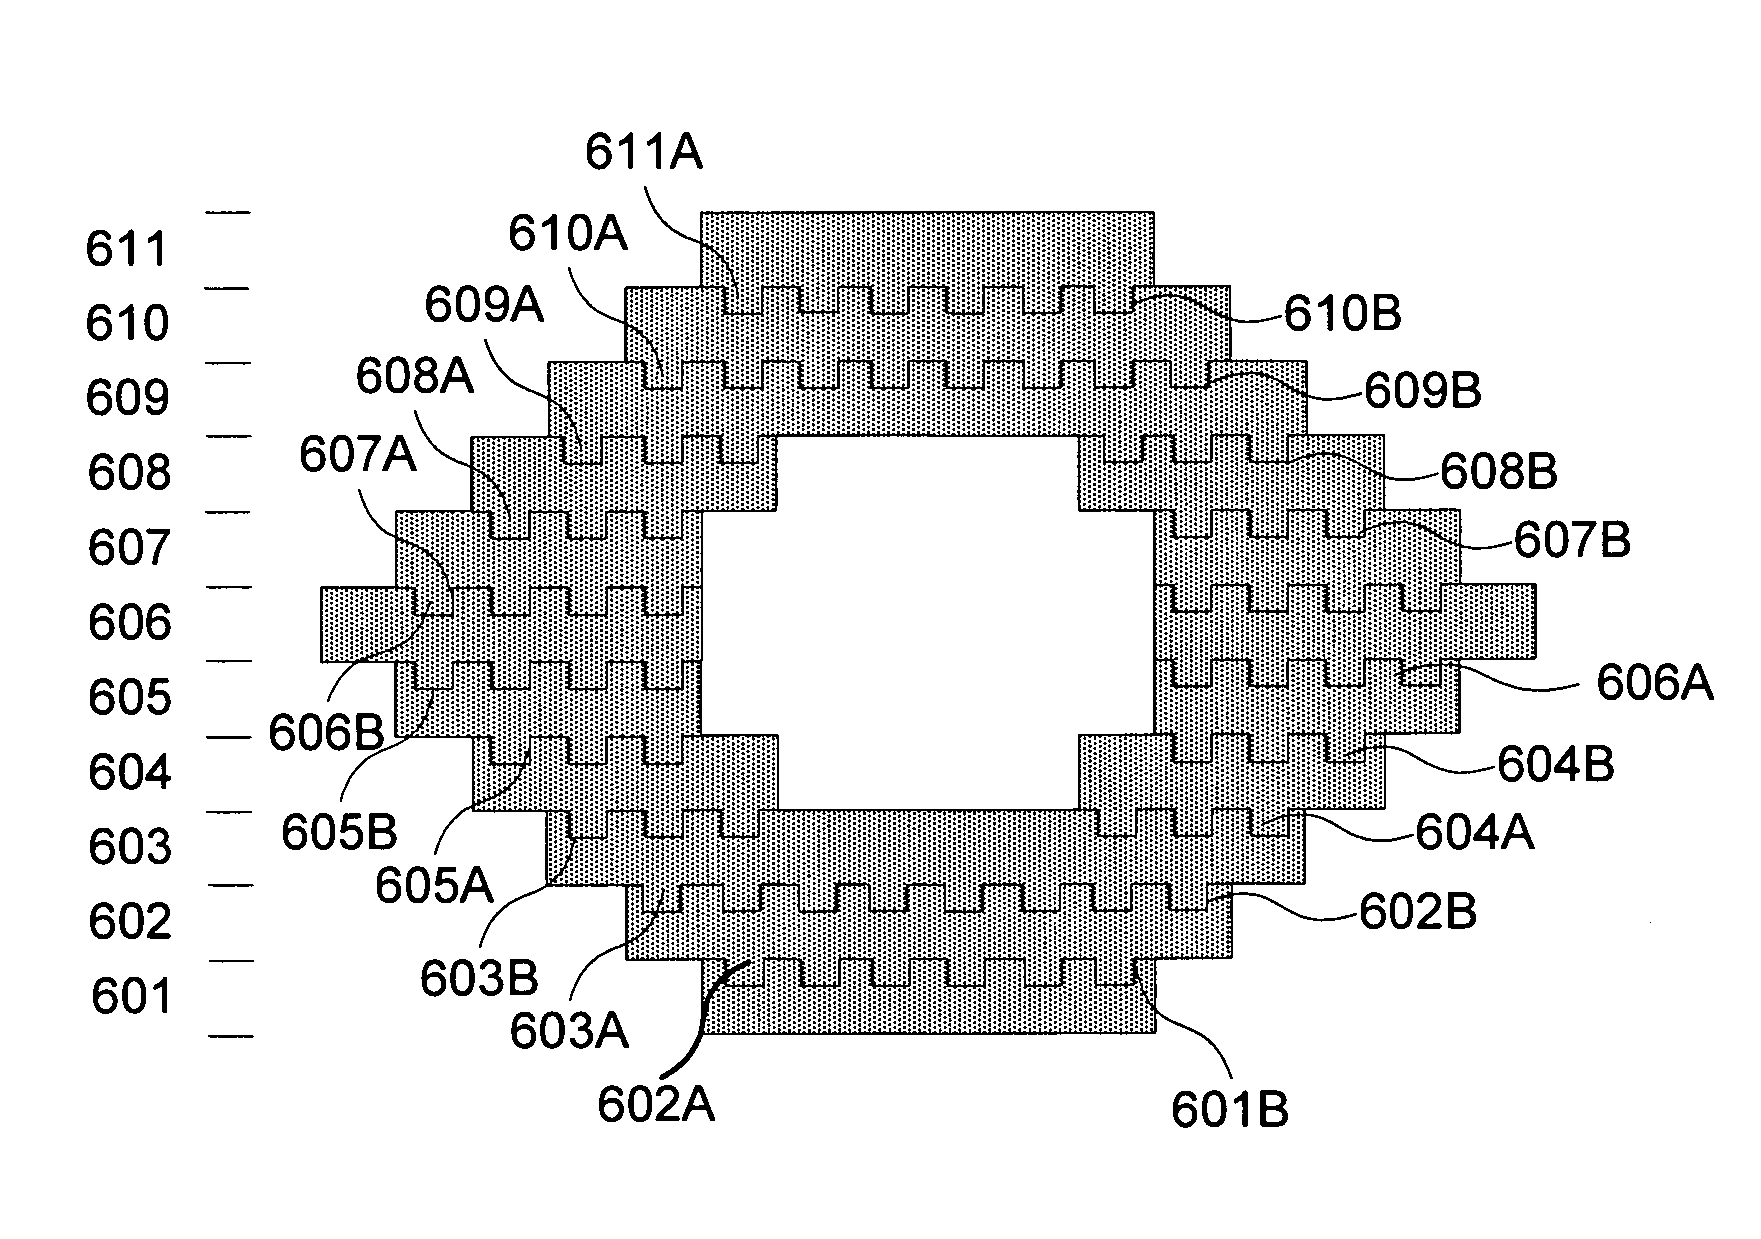 Methods of and apparatus for electrochemically fabricating structures via interlaced layers or via selective etching and filling of voids